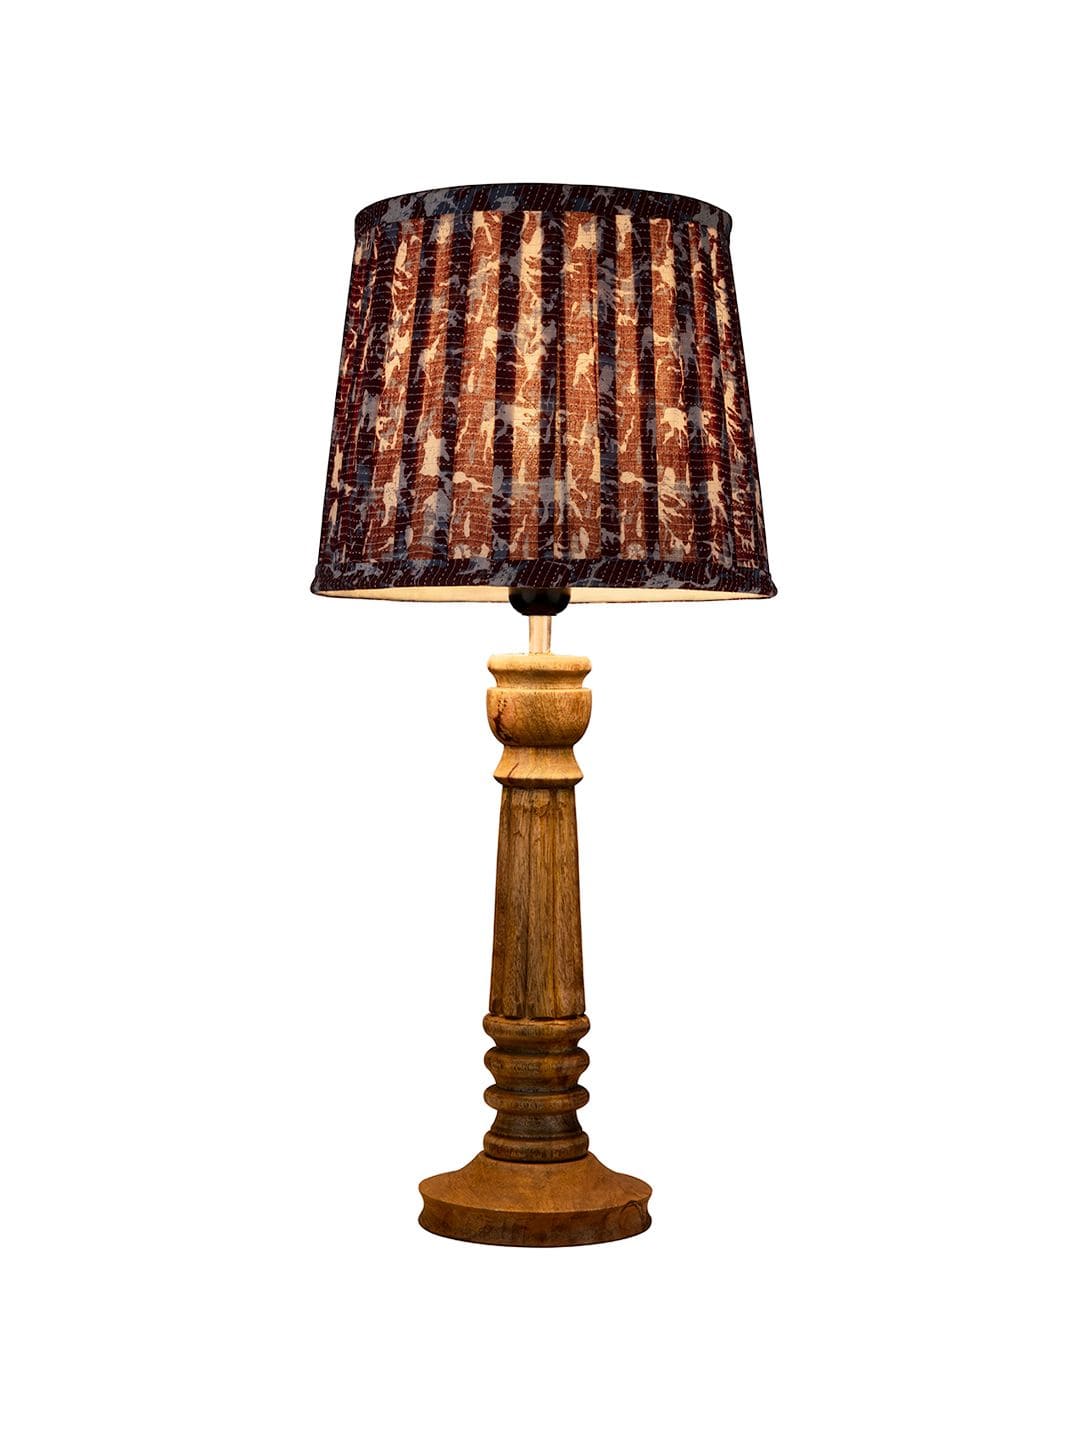 Wooden Pillar Brown lamp with pleeted Colorful Soft Shade